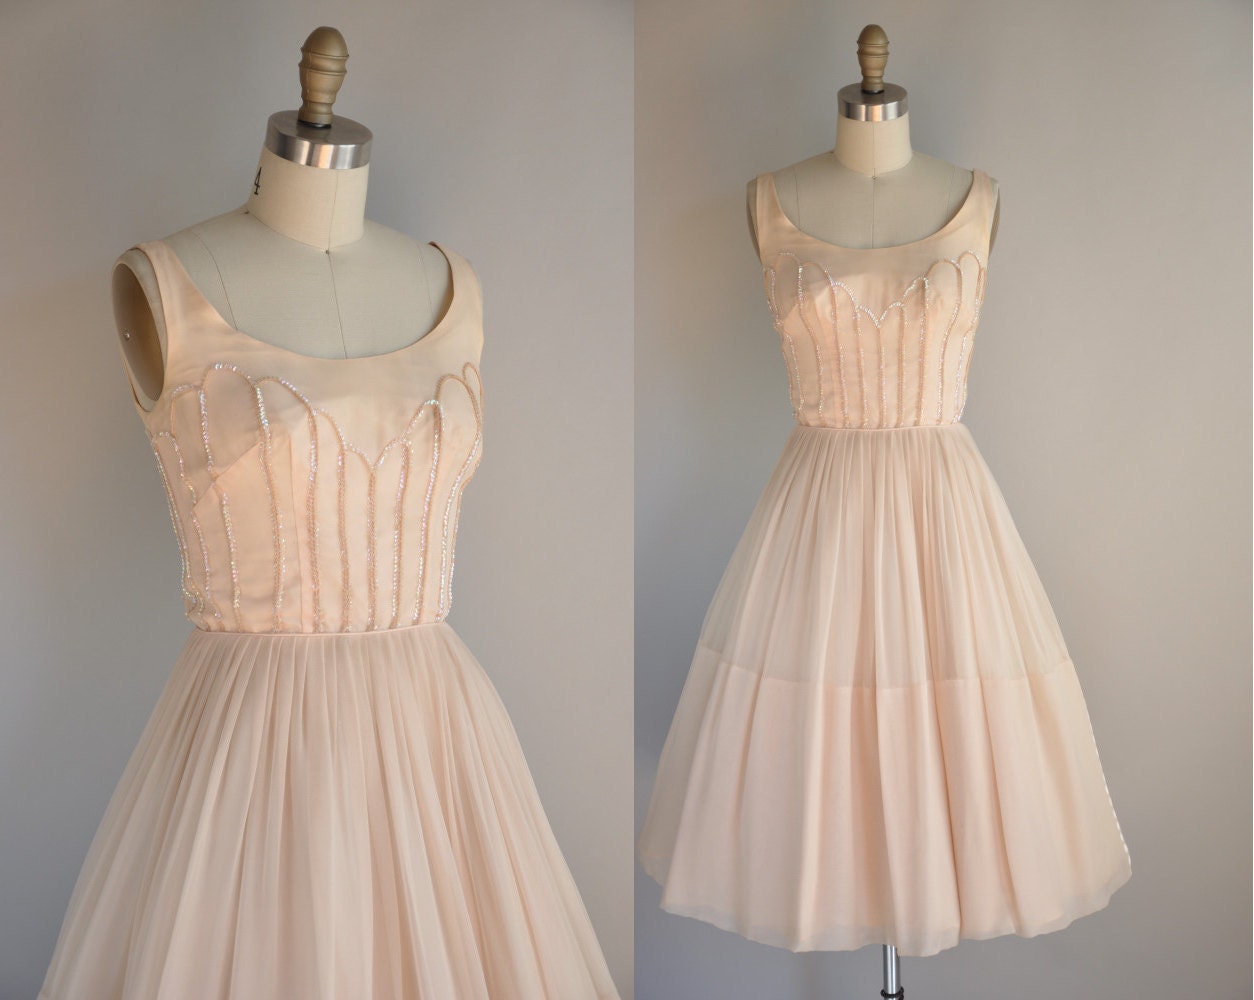 1950s vintage dress // 50s cocktail dress // by simplicityisbliss